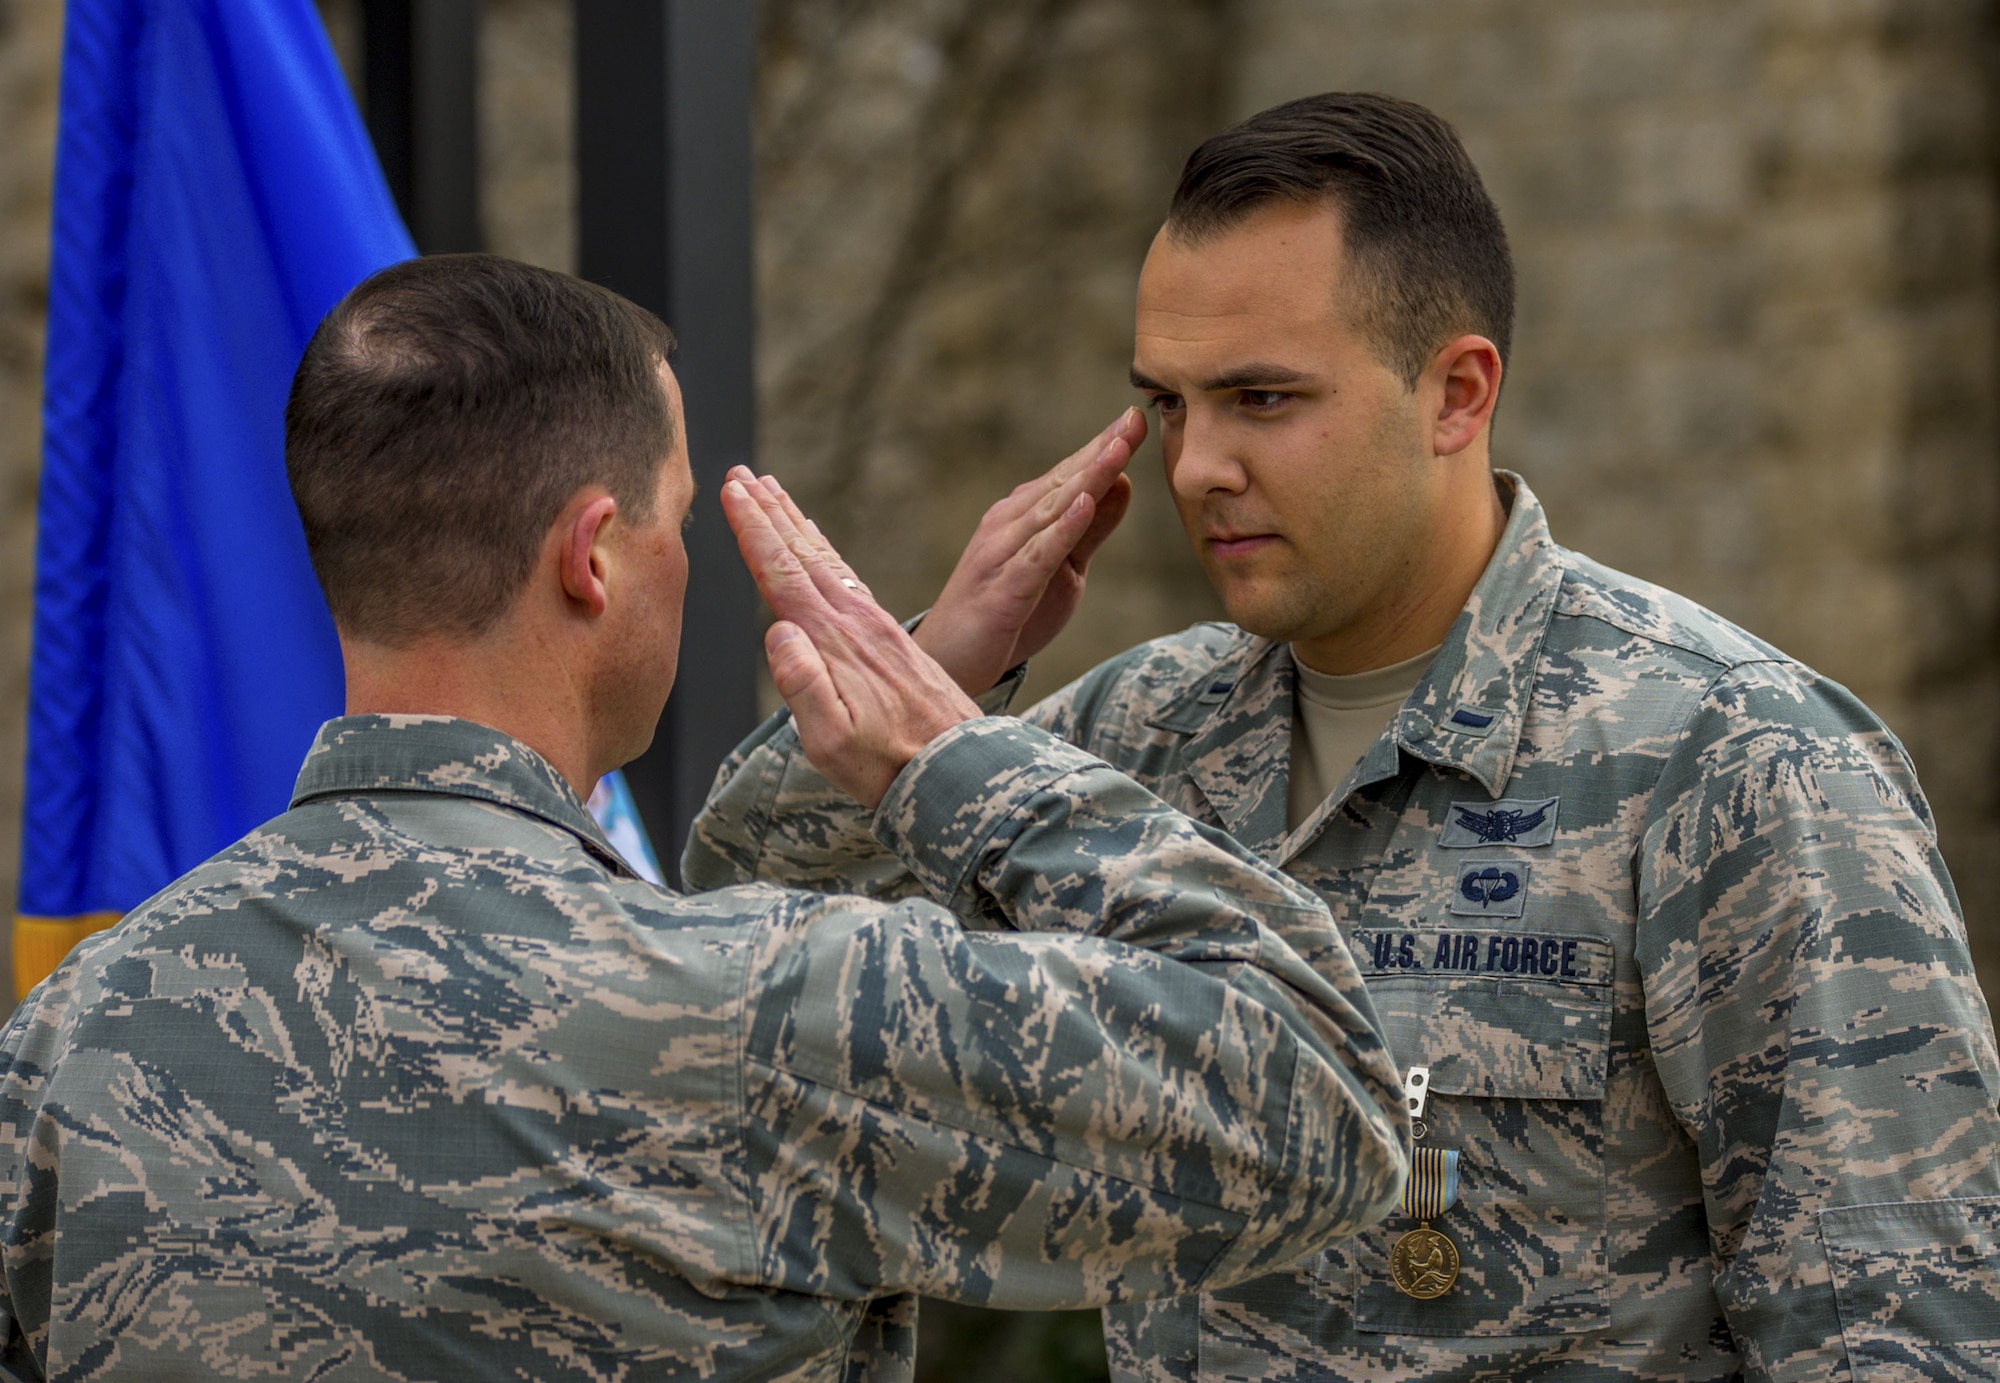 Airman's Medal awarded for heroic actions.